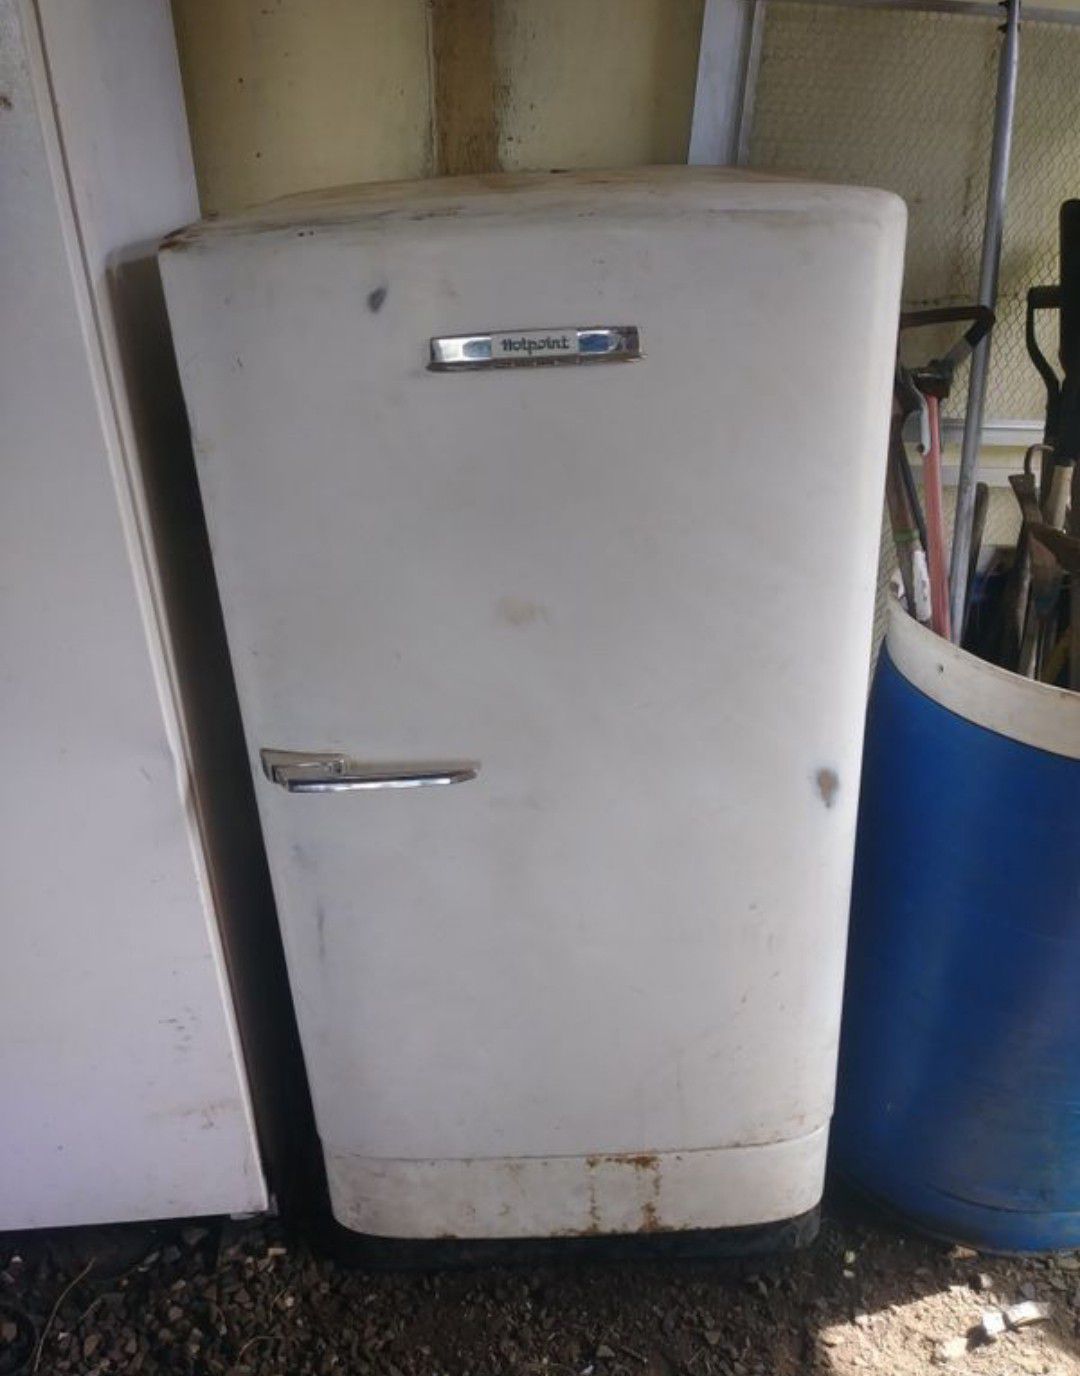 Late 1940s early 1950s Hot Point Vintage Refrigerator